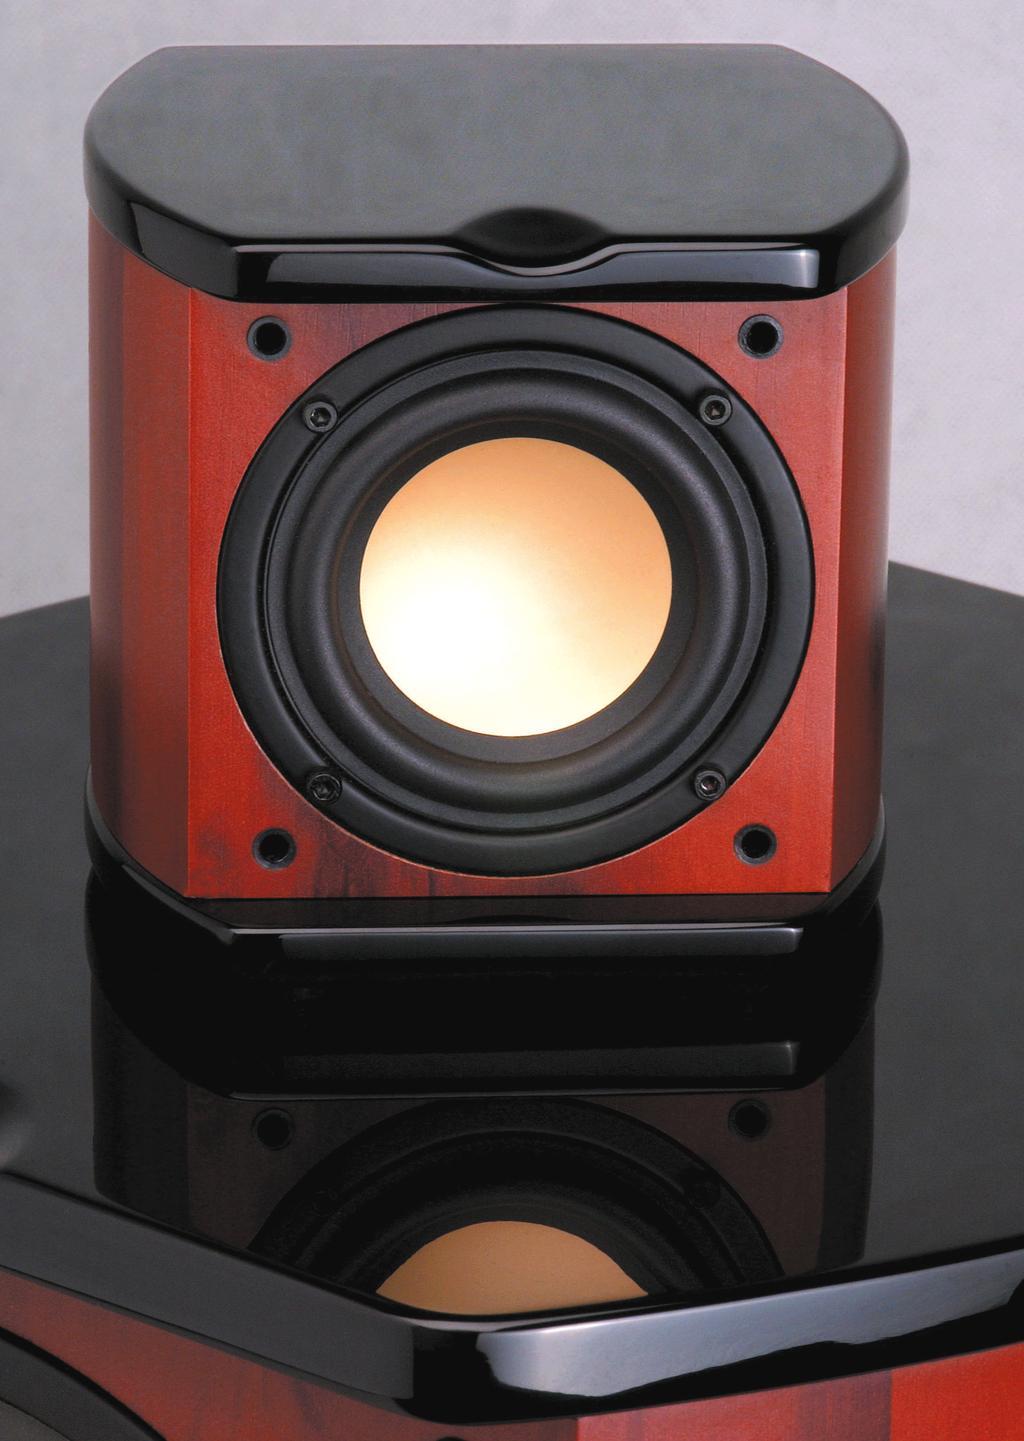 0" full range speakers, dedicated high-output center channel speaker with